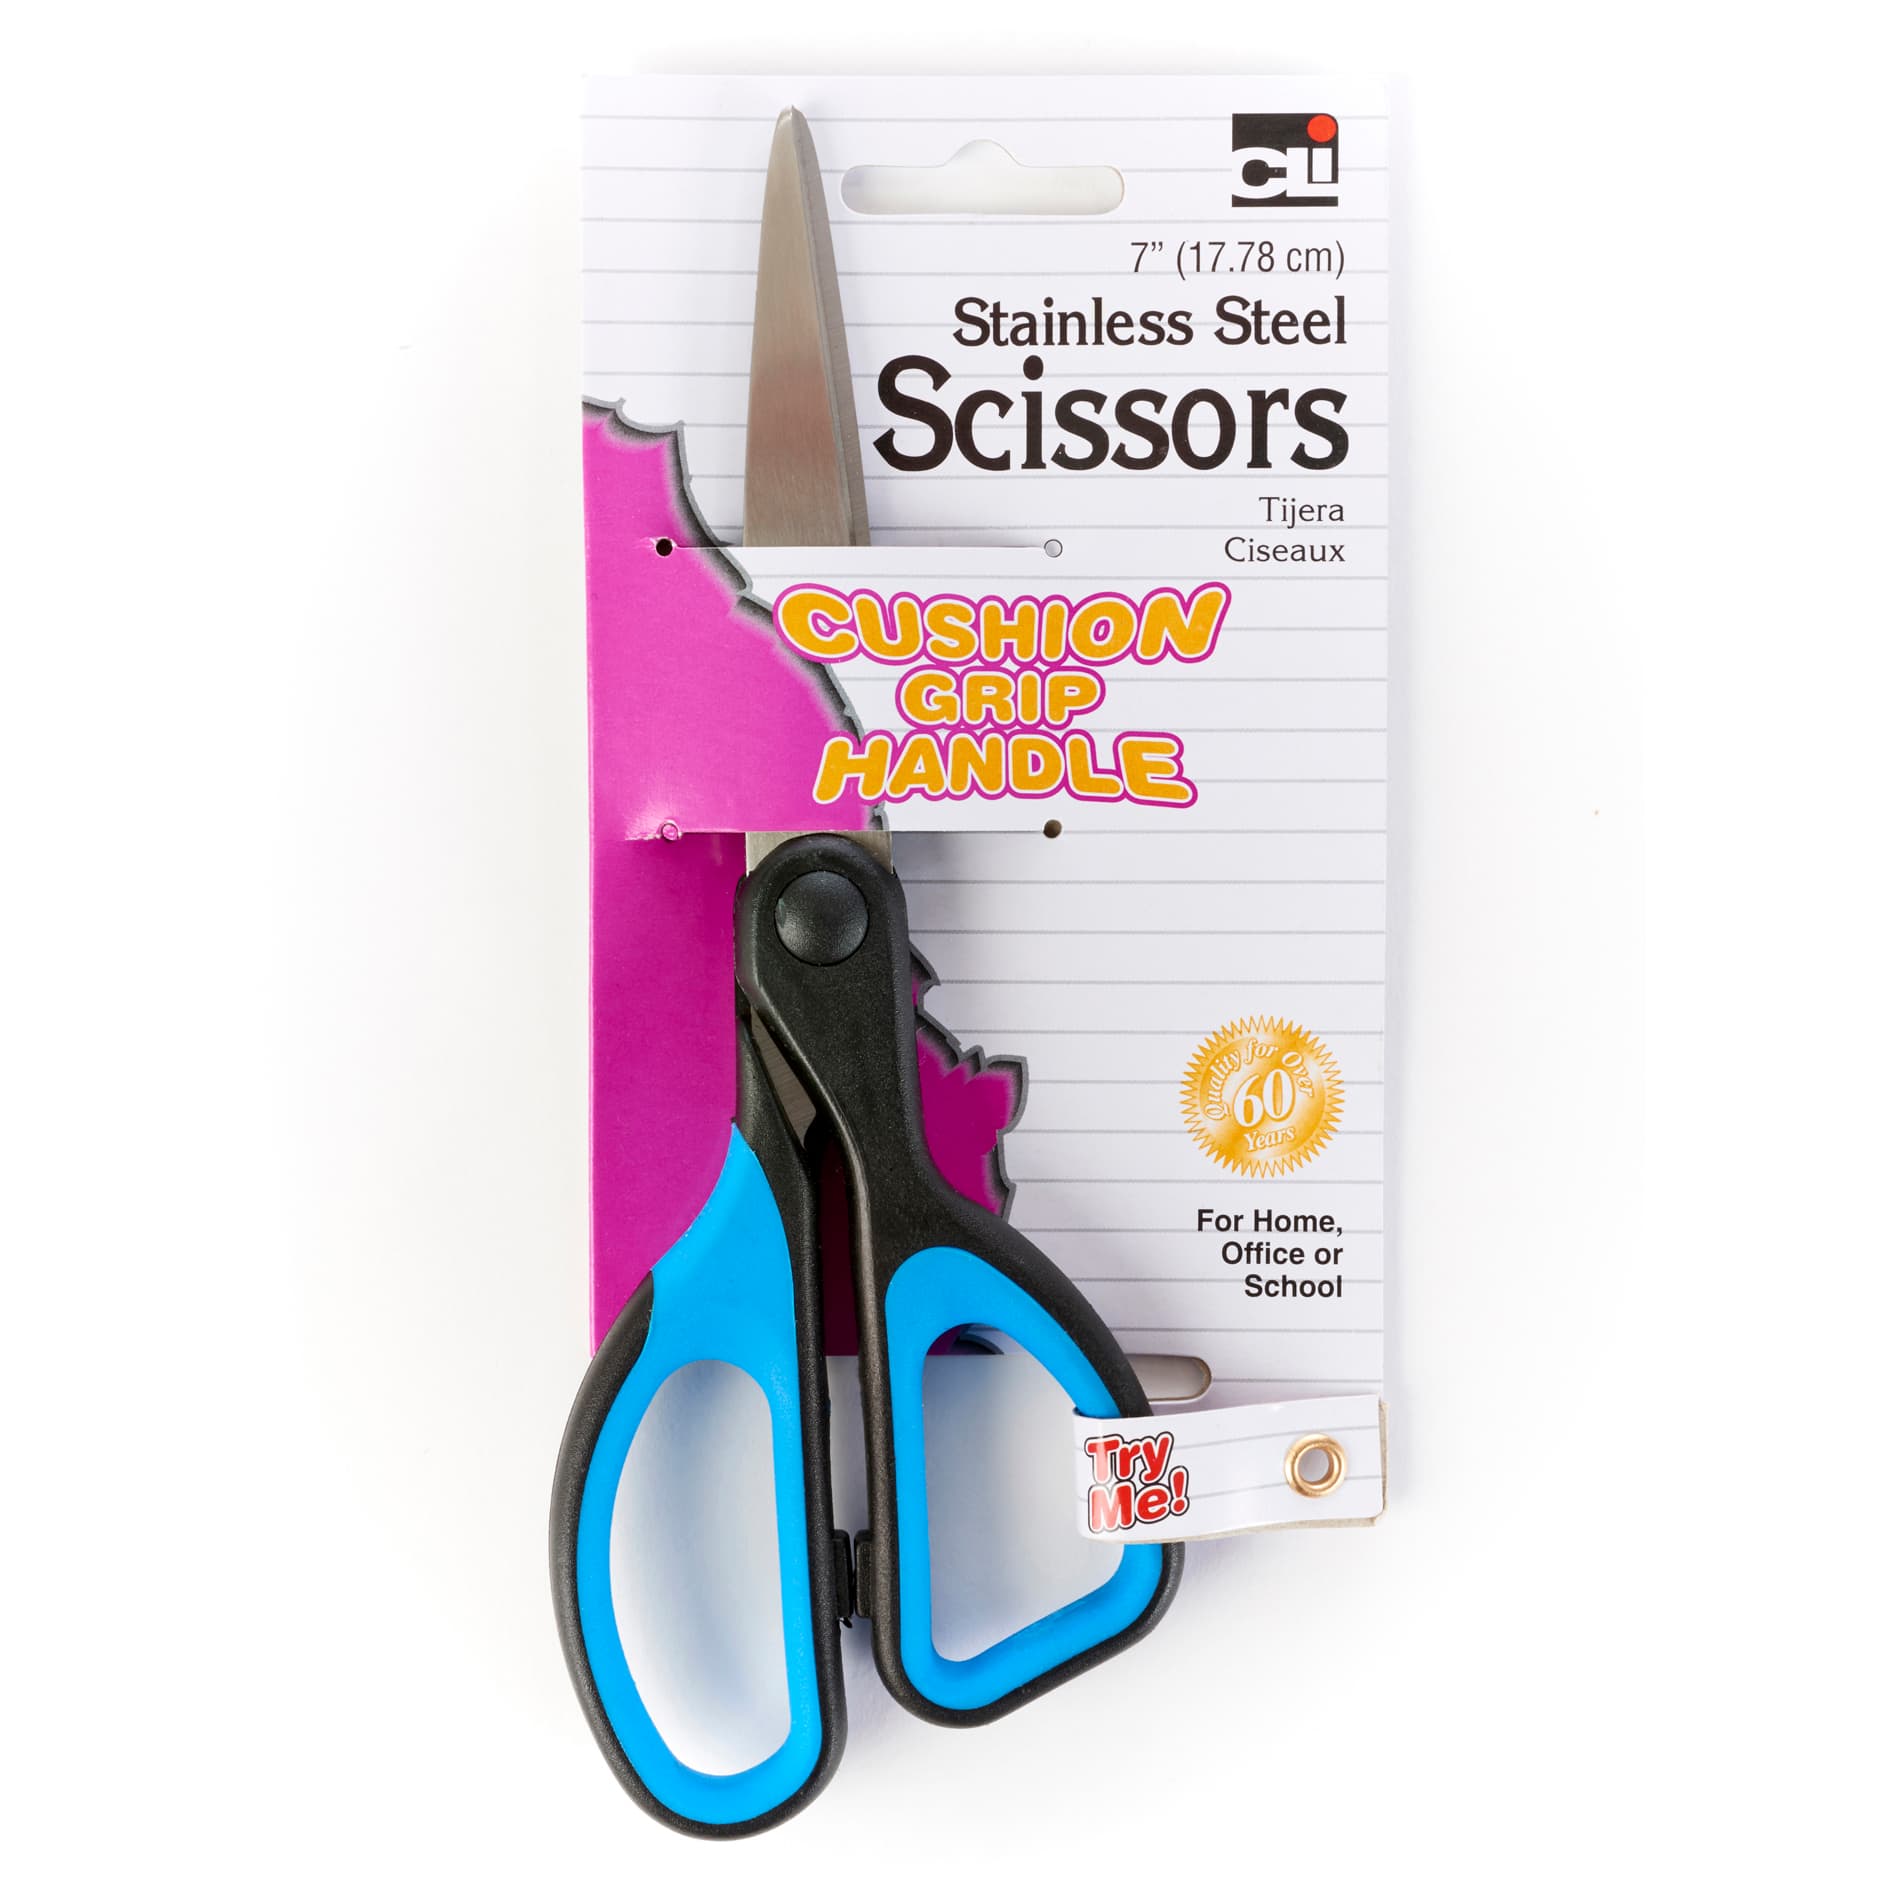 Asdirne 5” Kids Scissors, Safety Children Scissors, Craft Scissors with  Blunt Tip Stainless Steel Blades and Soft Grip, Great for Home and School